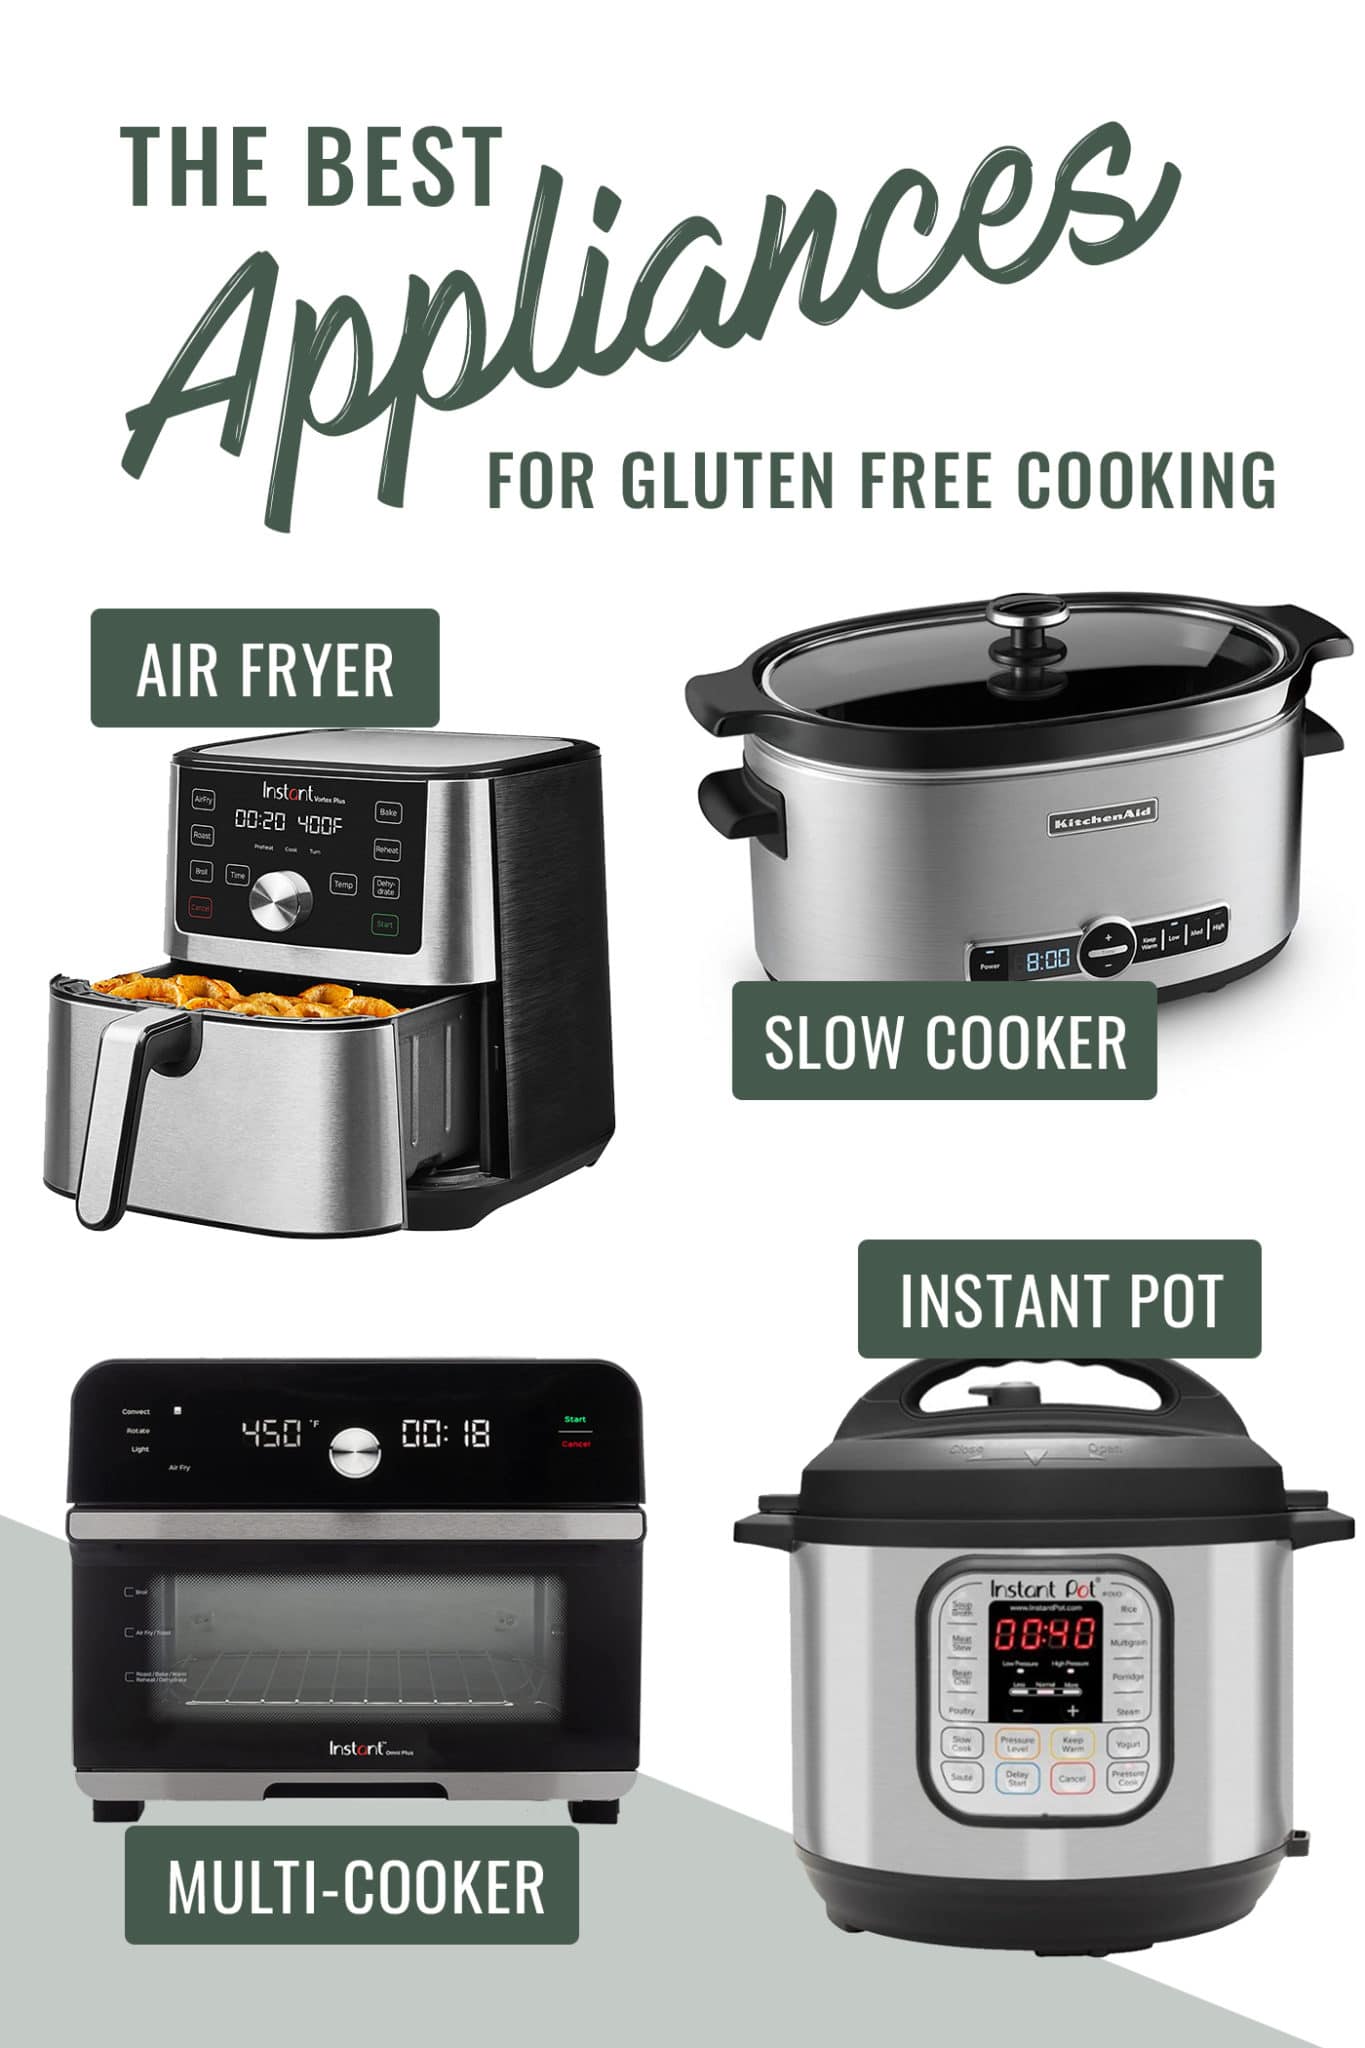 printable for an easy gluten free shopping list for the best appliances for gluten free cooking.